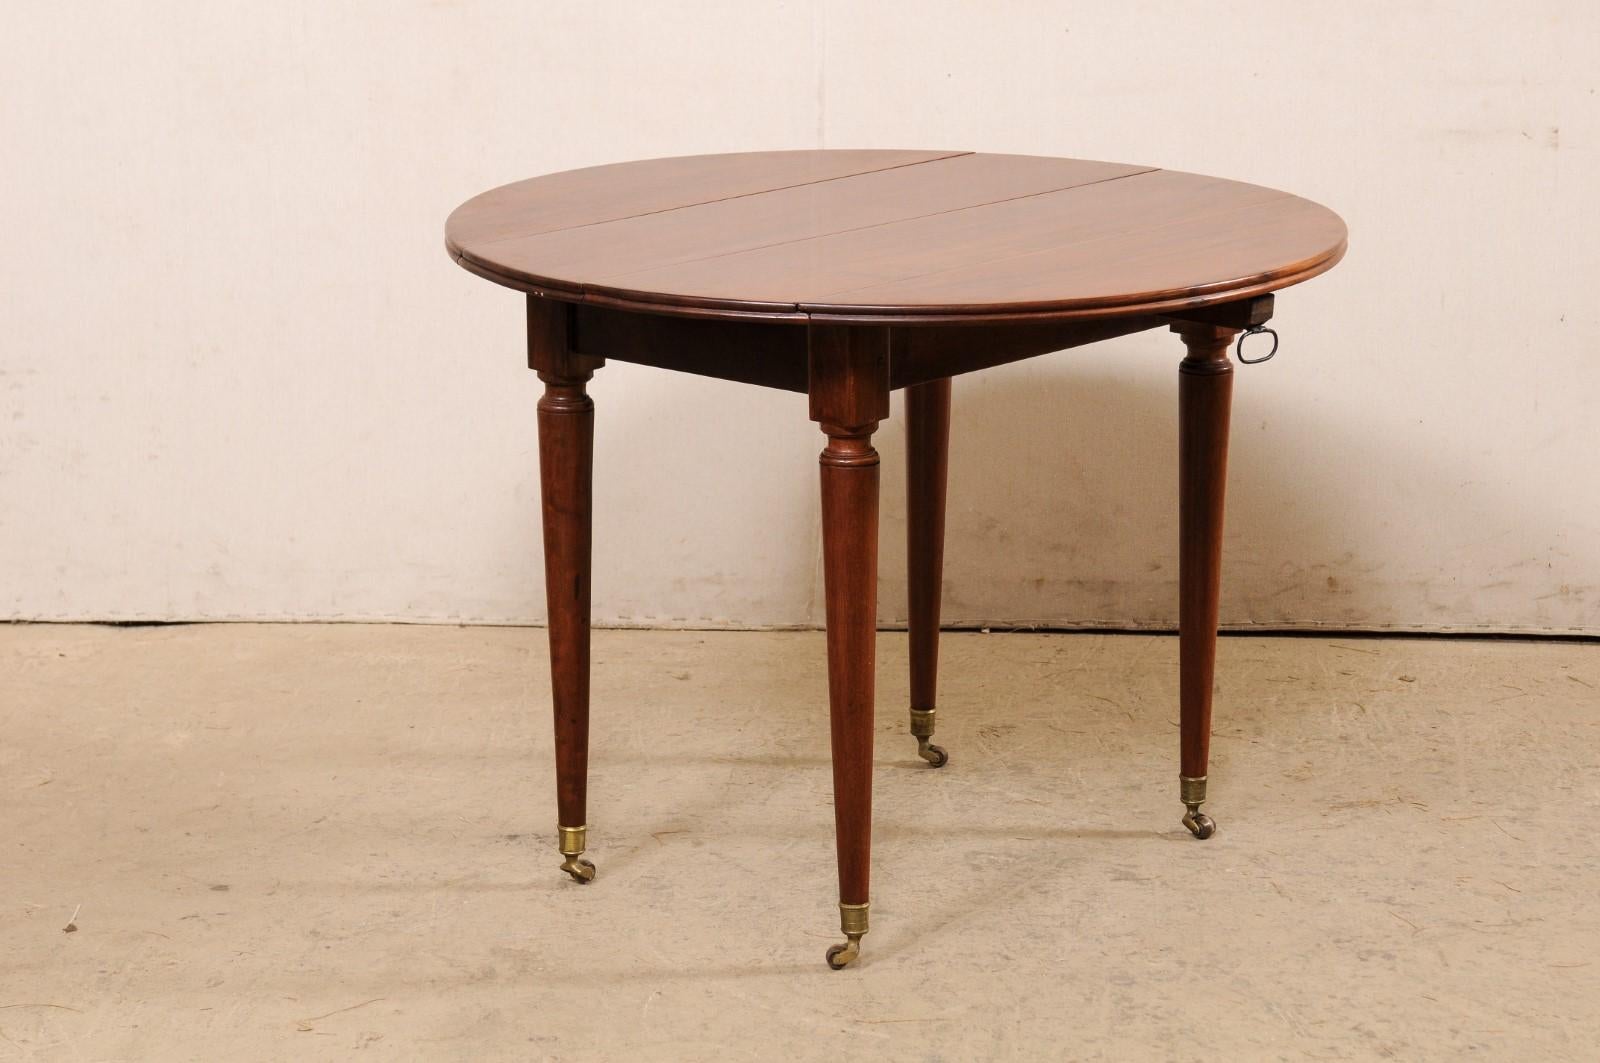 French 19th C. Mahogany Round Table W/Drop Leaves & Petite Brass Caster Feet For Sale 5